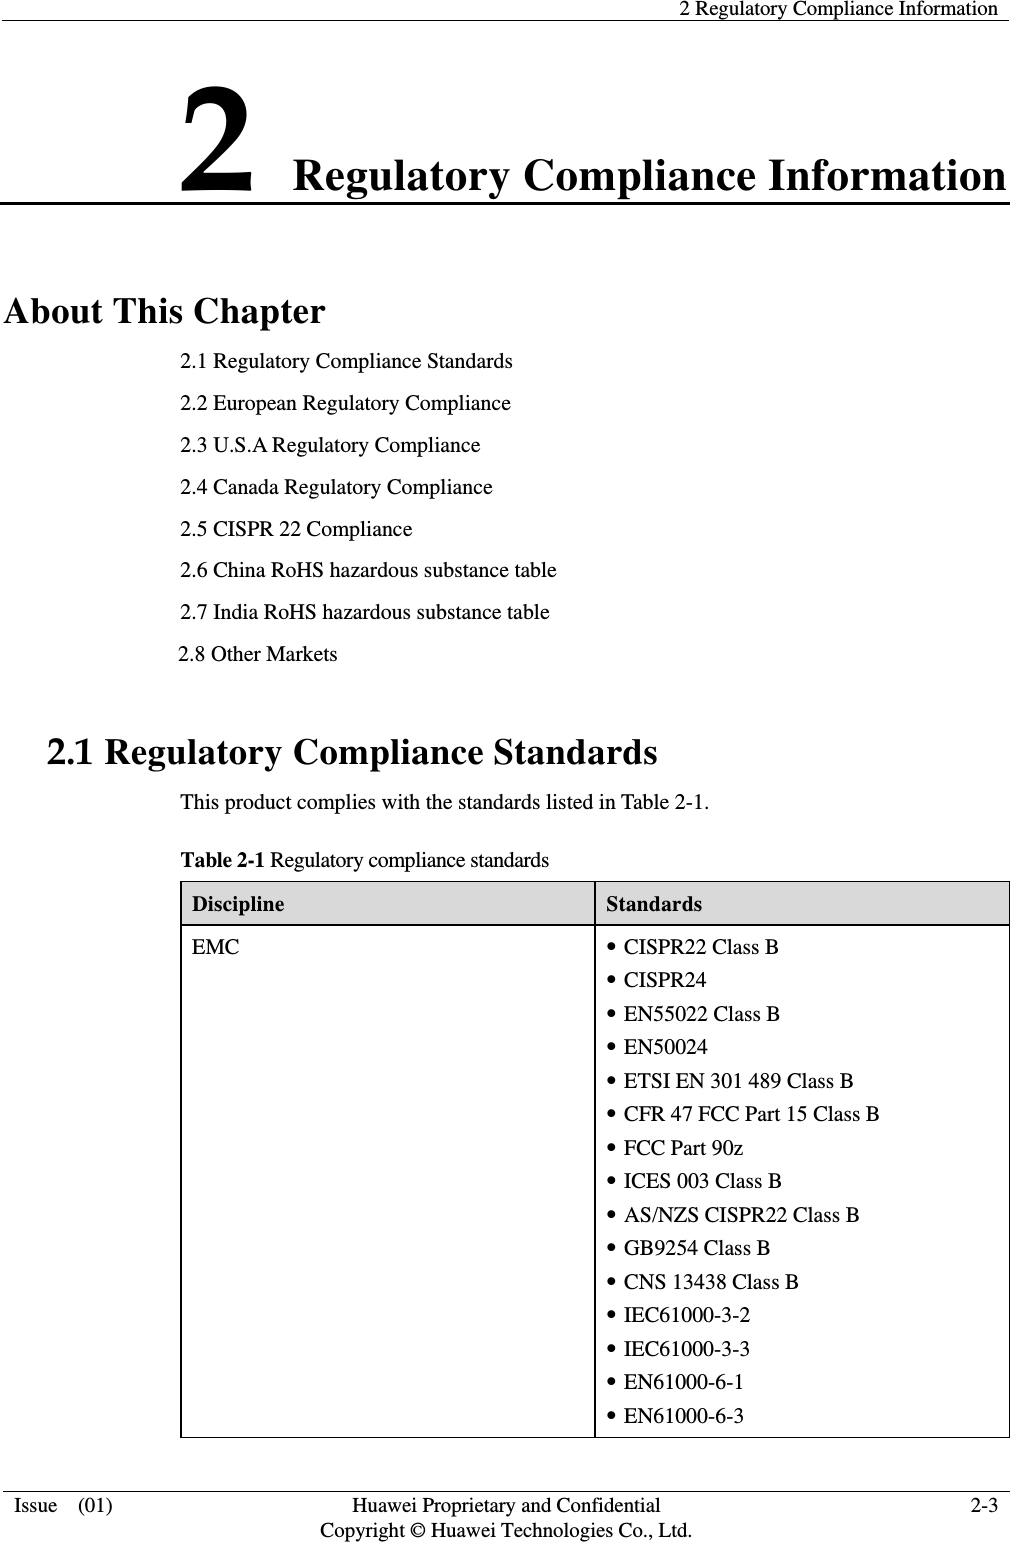   2 Regulatory Compliance Information   Issue    (01)  Huawei Proprietary and Confidential                                     Copyright © Huawei Technologies Co., Ltd.  2-3  2 Regulatory Compliance Information About This Chapter 2.1 Regulatory Compliance Standards 2.2 European Regulatory Compliance 2.3 U.S.A Regulatory Compliance 2.4 Canada Regulatory Compliance   2.5 CISPR 22 Compliance                       2.6 China RoHS hazardous substance table 2.7 India RoHS hazardous substance table 2.8 Other Markets 2.1 Regulatory Compliance Standards This product complies with the standards listed in Table 2-1. Table 2-1 Regulatory compliance standards Discipline  Standards EMC   CISPR22 Class B  CISPR24  EN55022 Class B  EN50024  ETSI EN 301 489 Class B  CFR 47 FCC Part 15 Class B  FCC Part 90z  ICES 003 Class B  AS/NZS CISPR22 Class B  GB9254 Class B  CNS 13438 Class B  IEC61000-3-2  IEC61000-3-3  EN61000-6-1  EN61000-6-3 